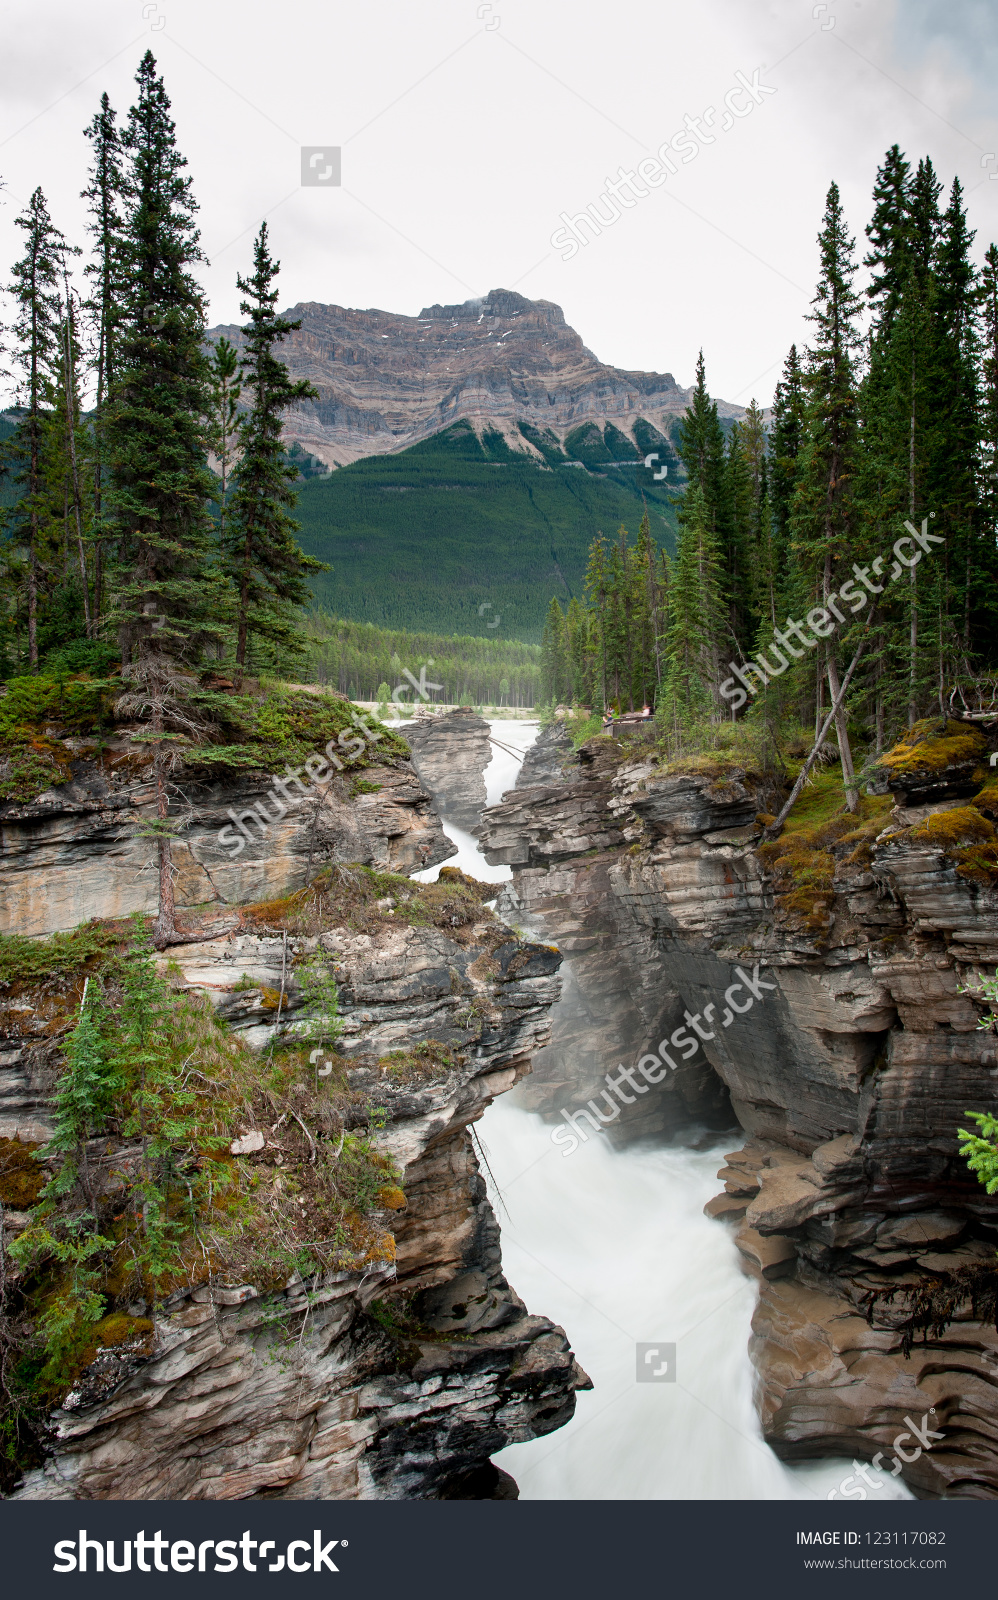 Athabasca Falls clipart #1, Download drawings